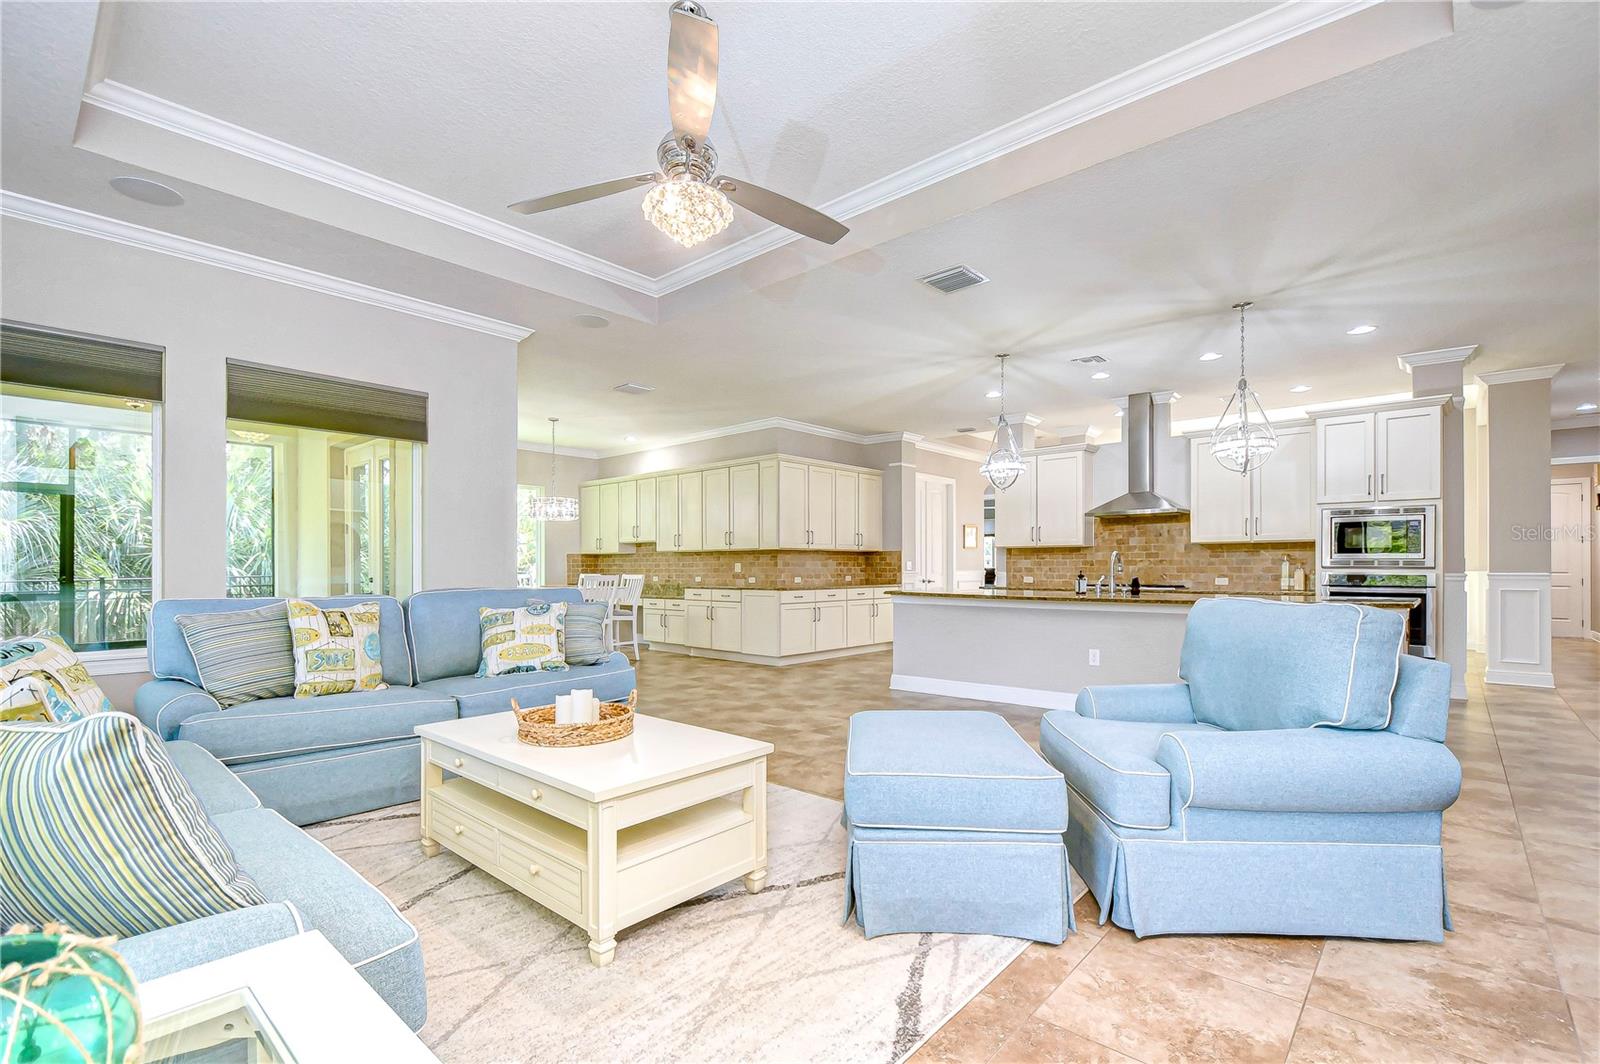 Family room features tons of space to relax or entertain!